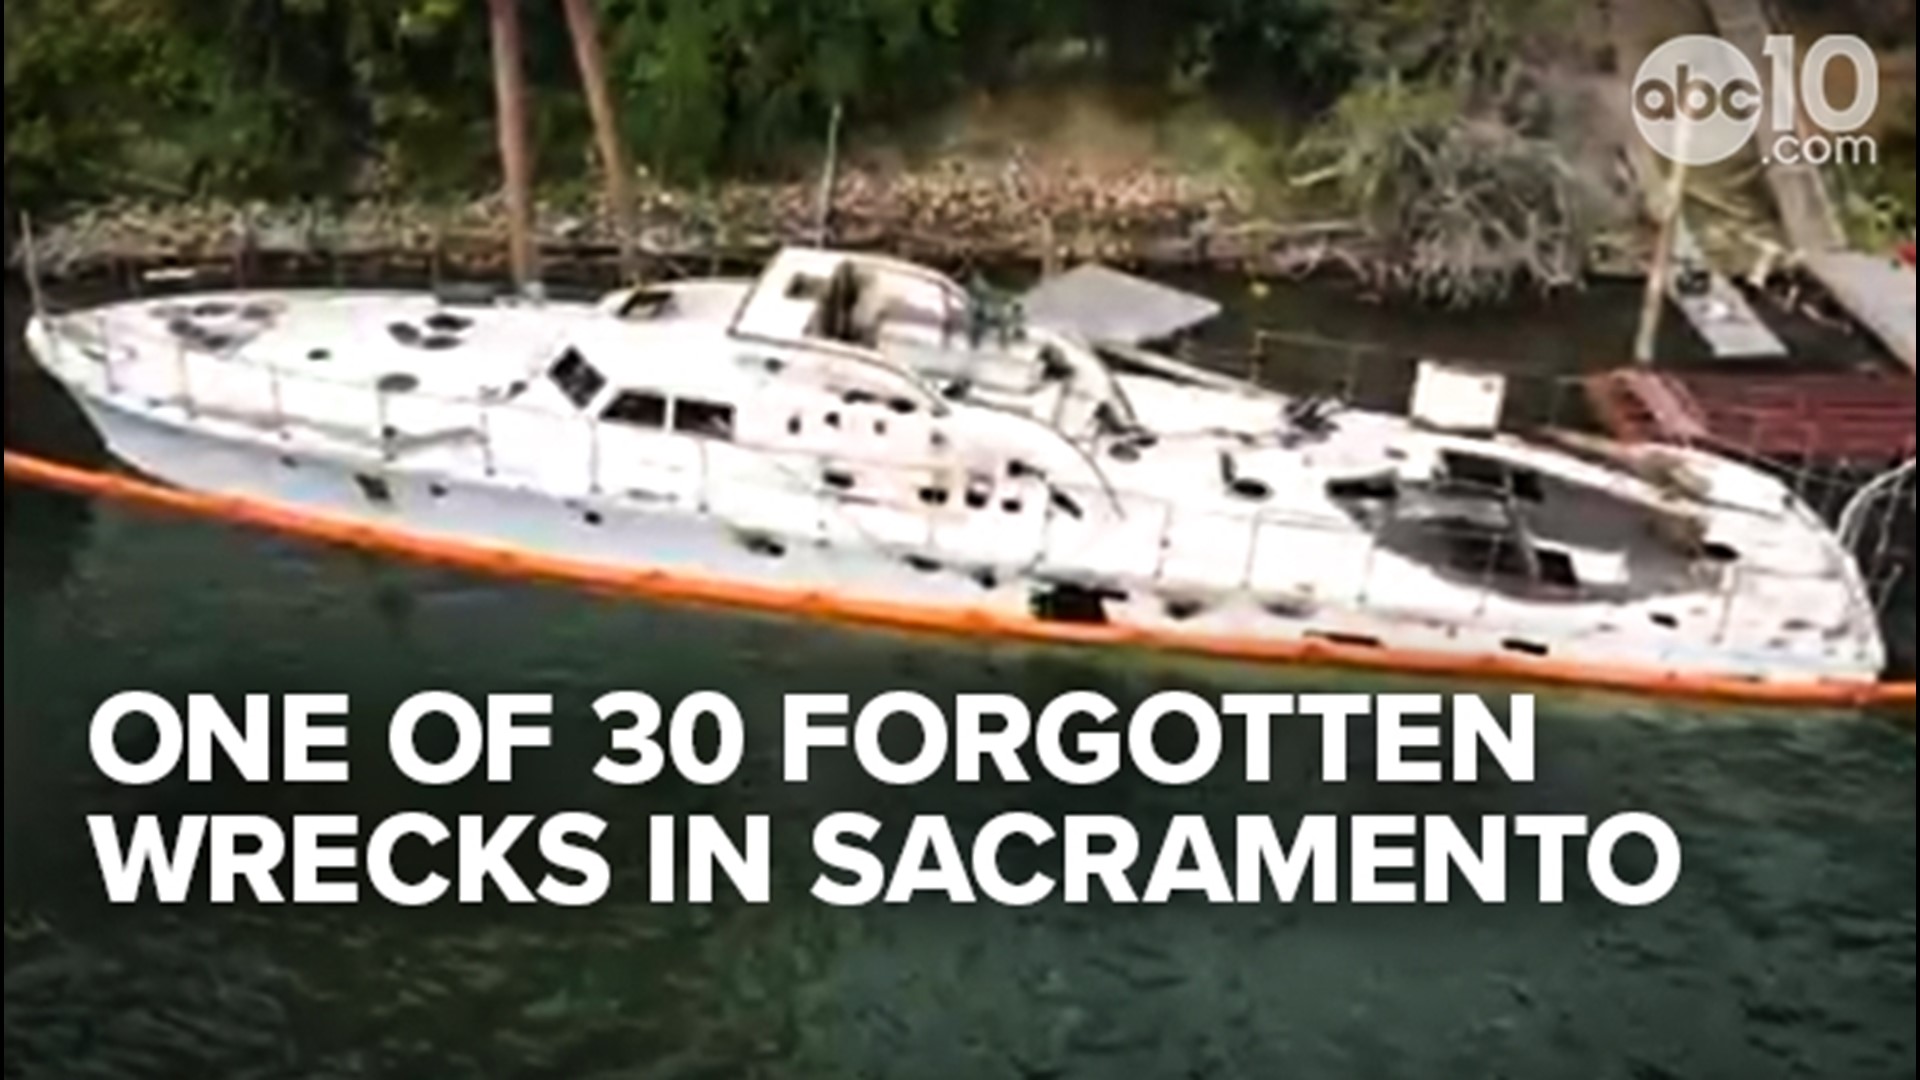 The boat is one of 30 "commercial derelict and abandoned vessels" in Sacramento County's waterways. Senate Bill 1065 aims to tackle a state-wide problem.